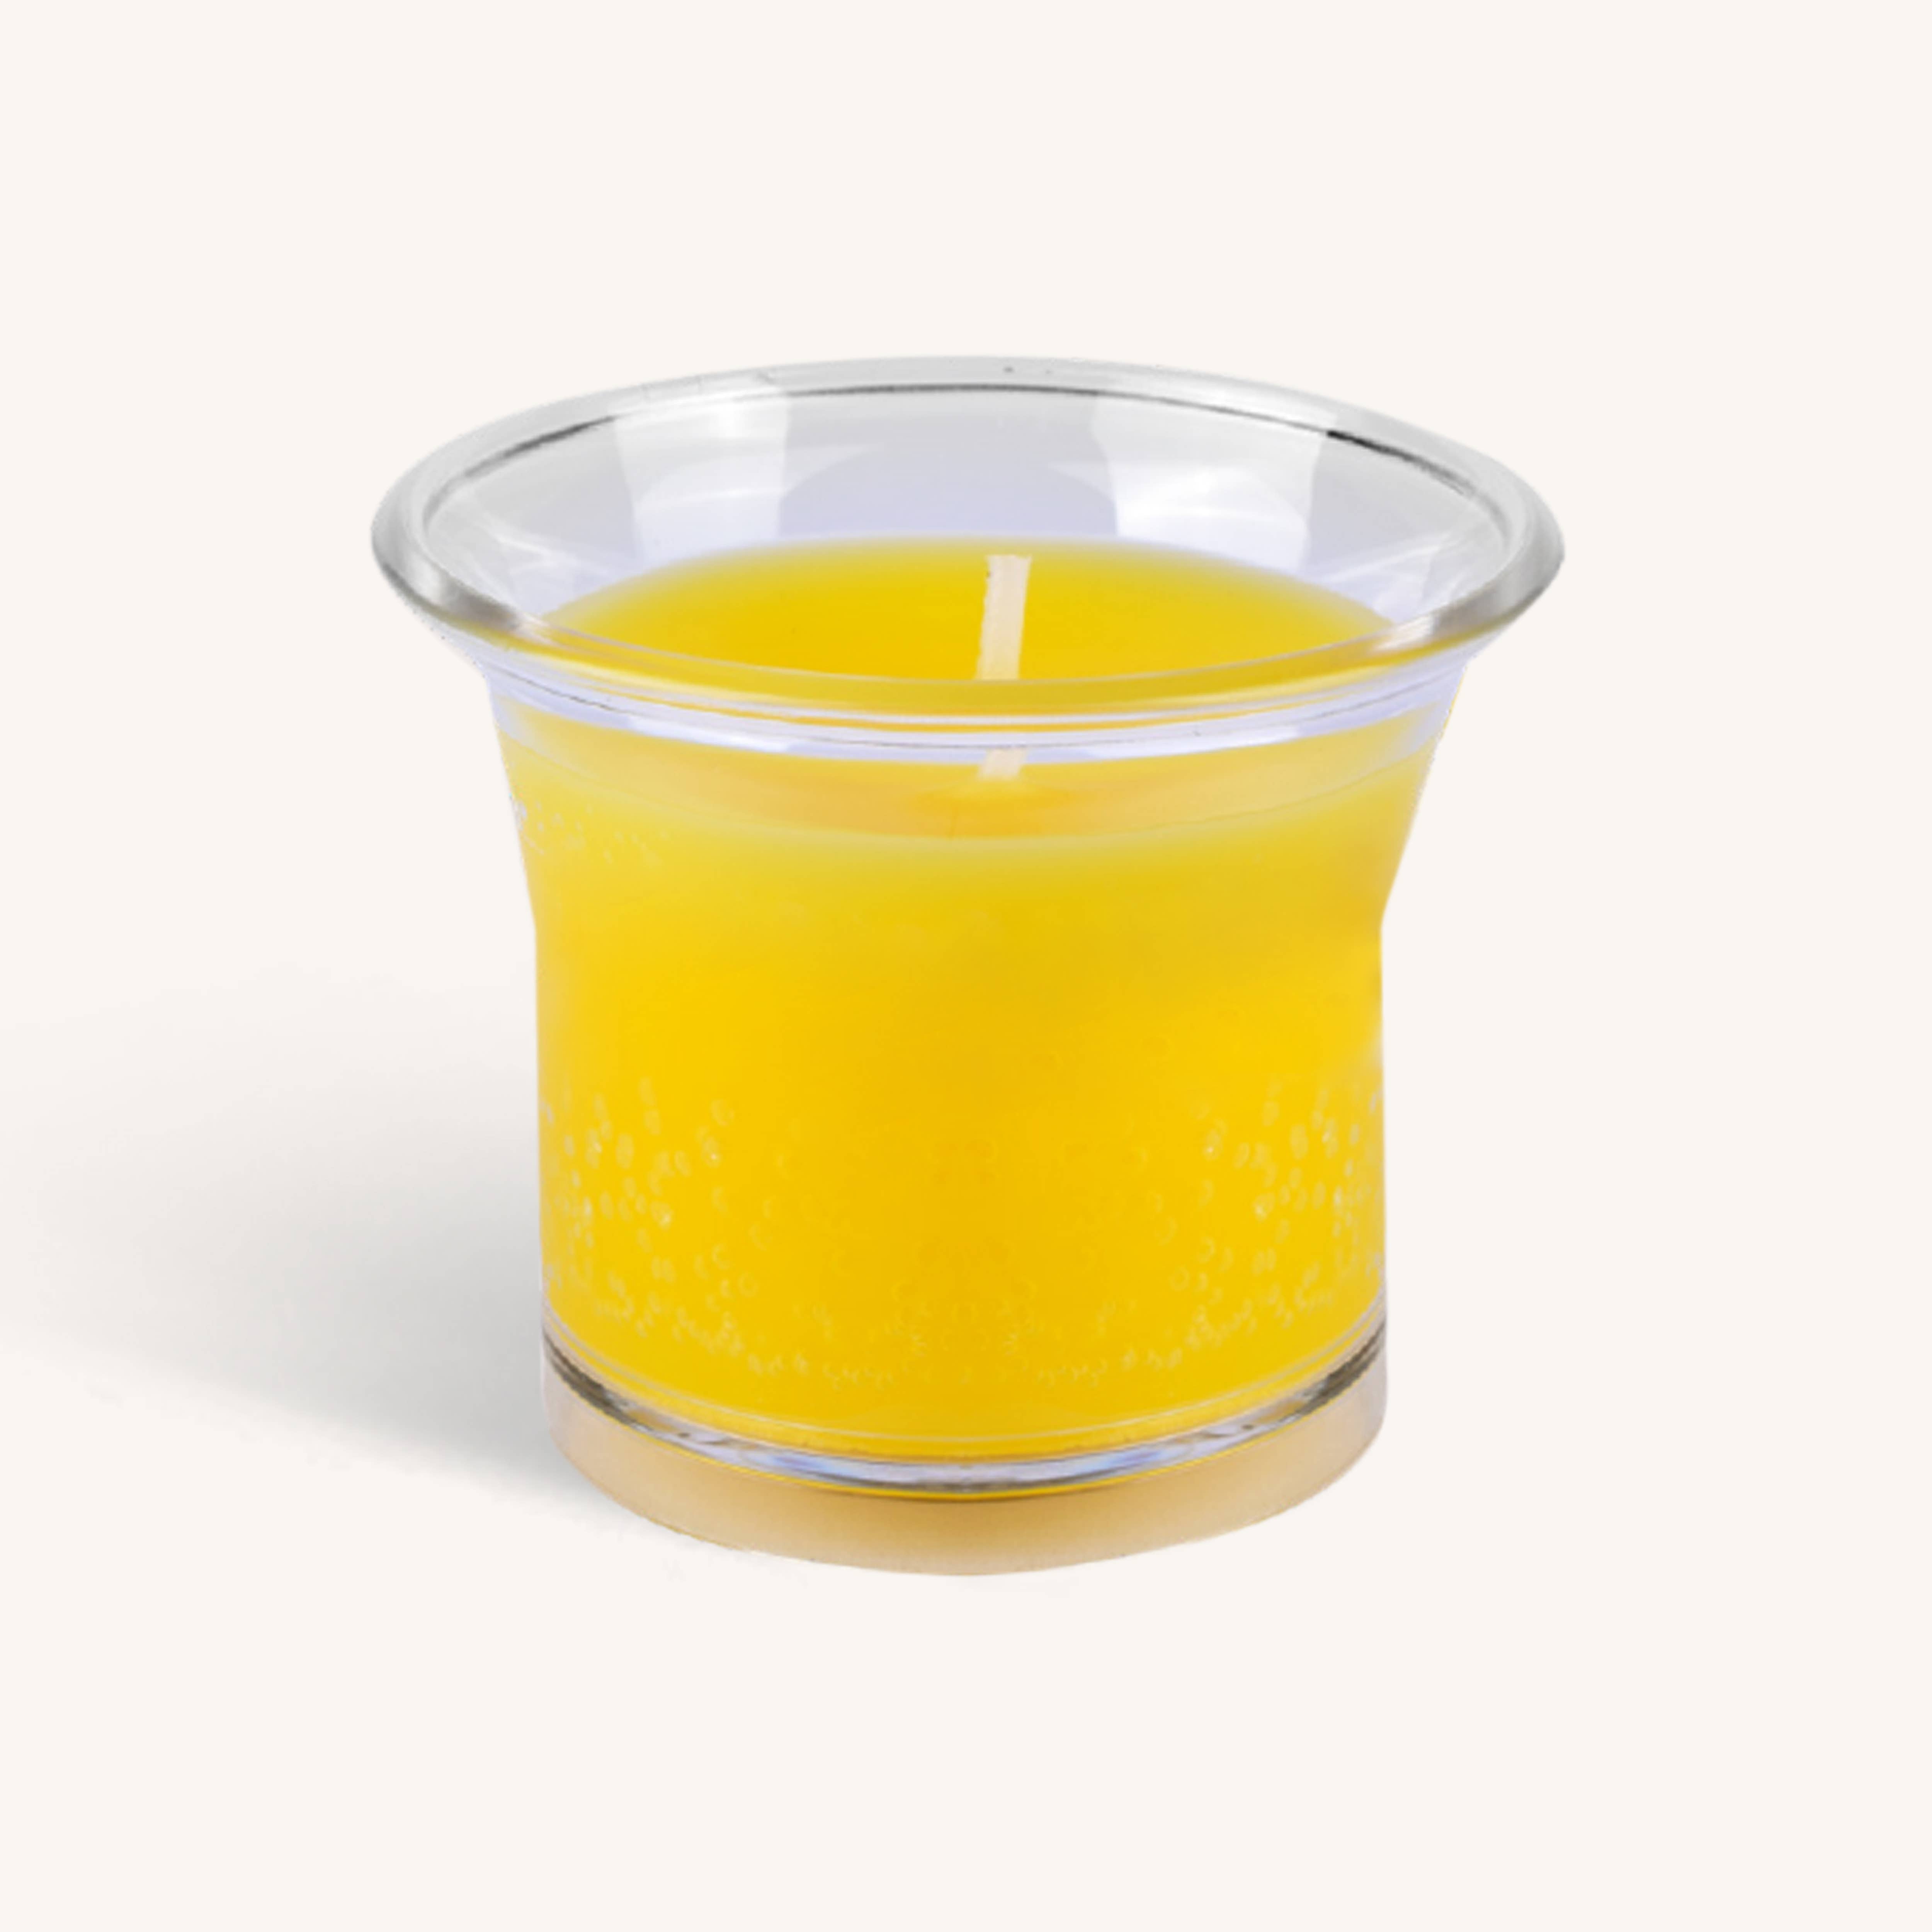 Citronella Votive Candle in Plastic Cups - 12 Hours - 4 Pack